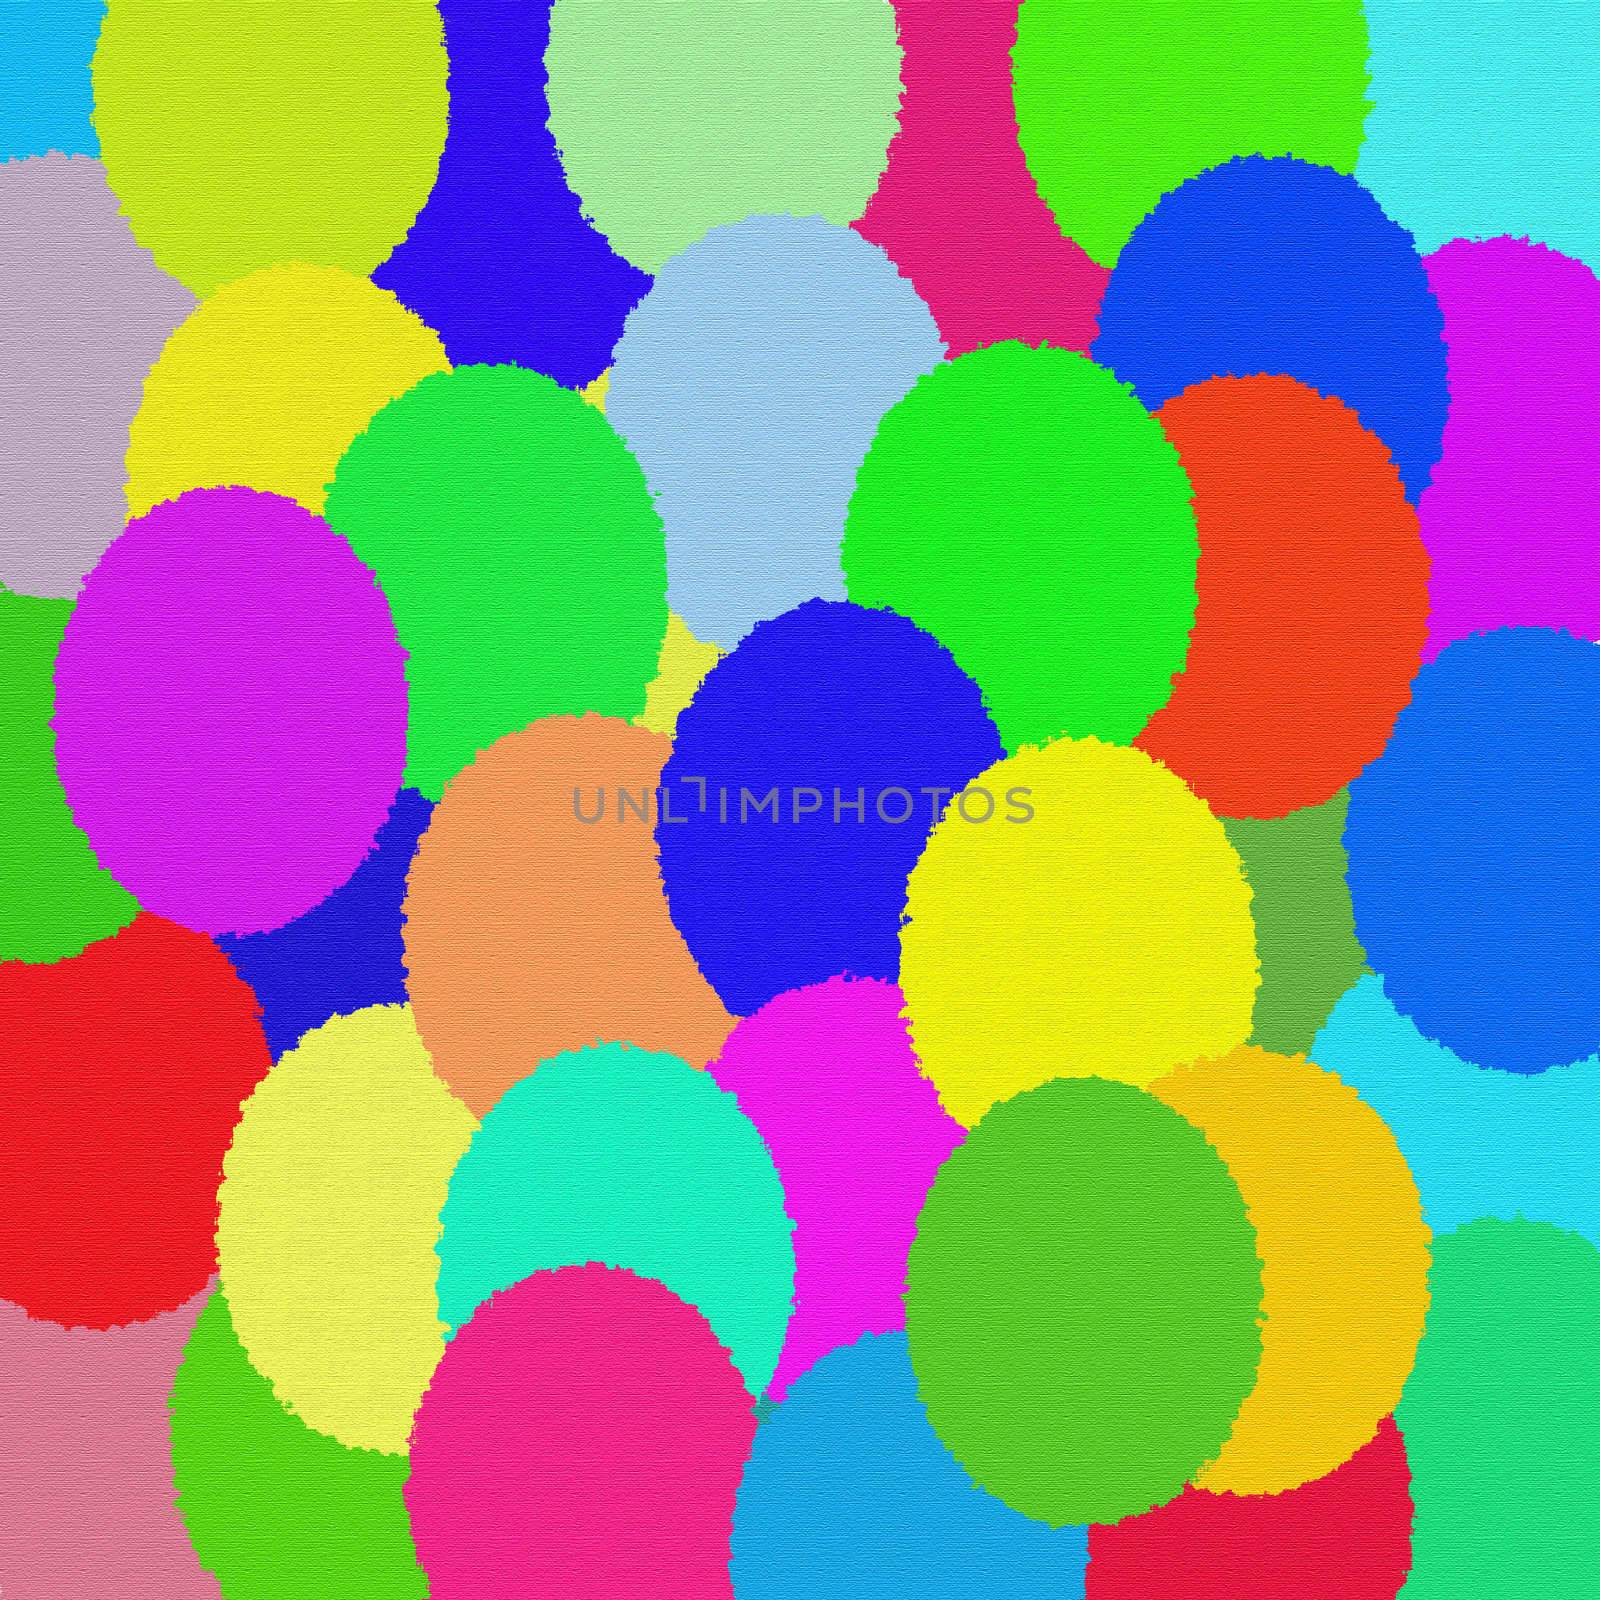 Colorful and texturized background